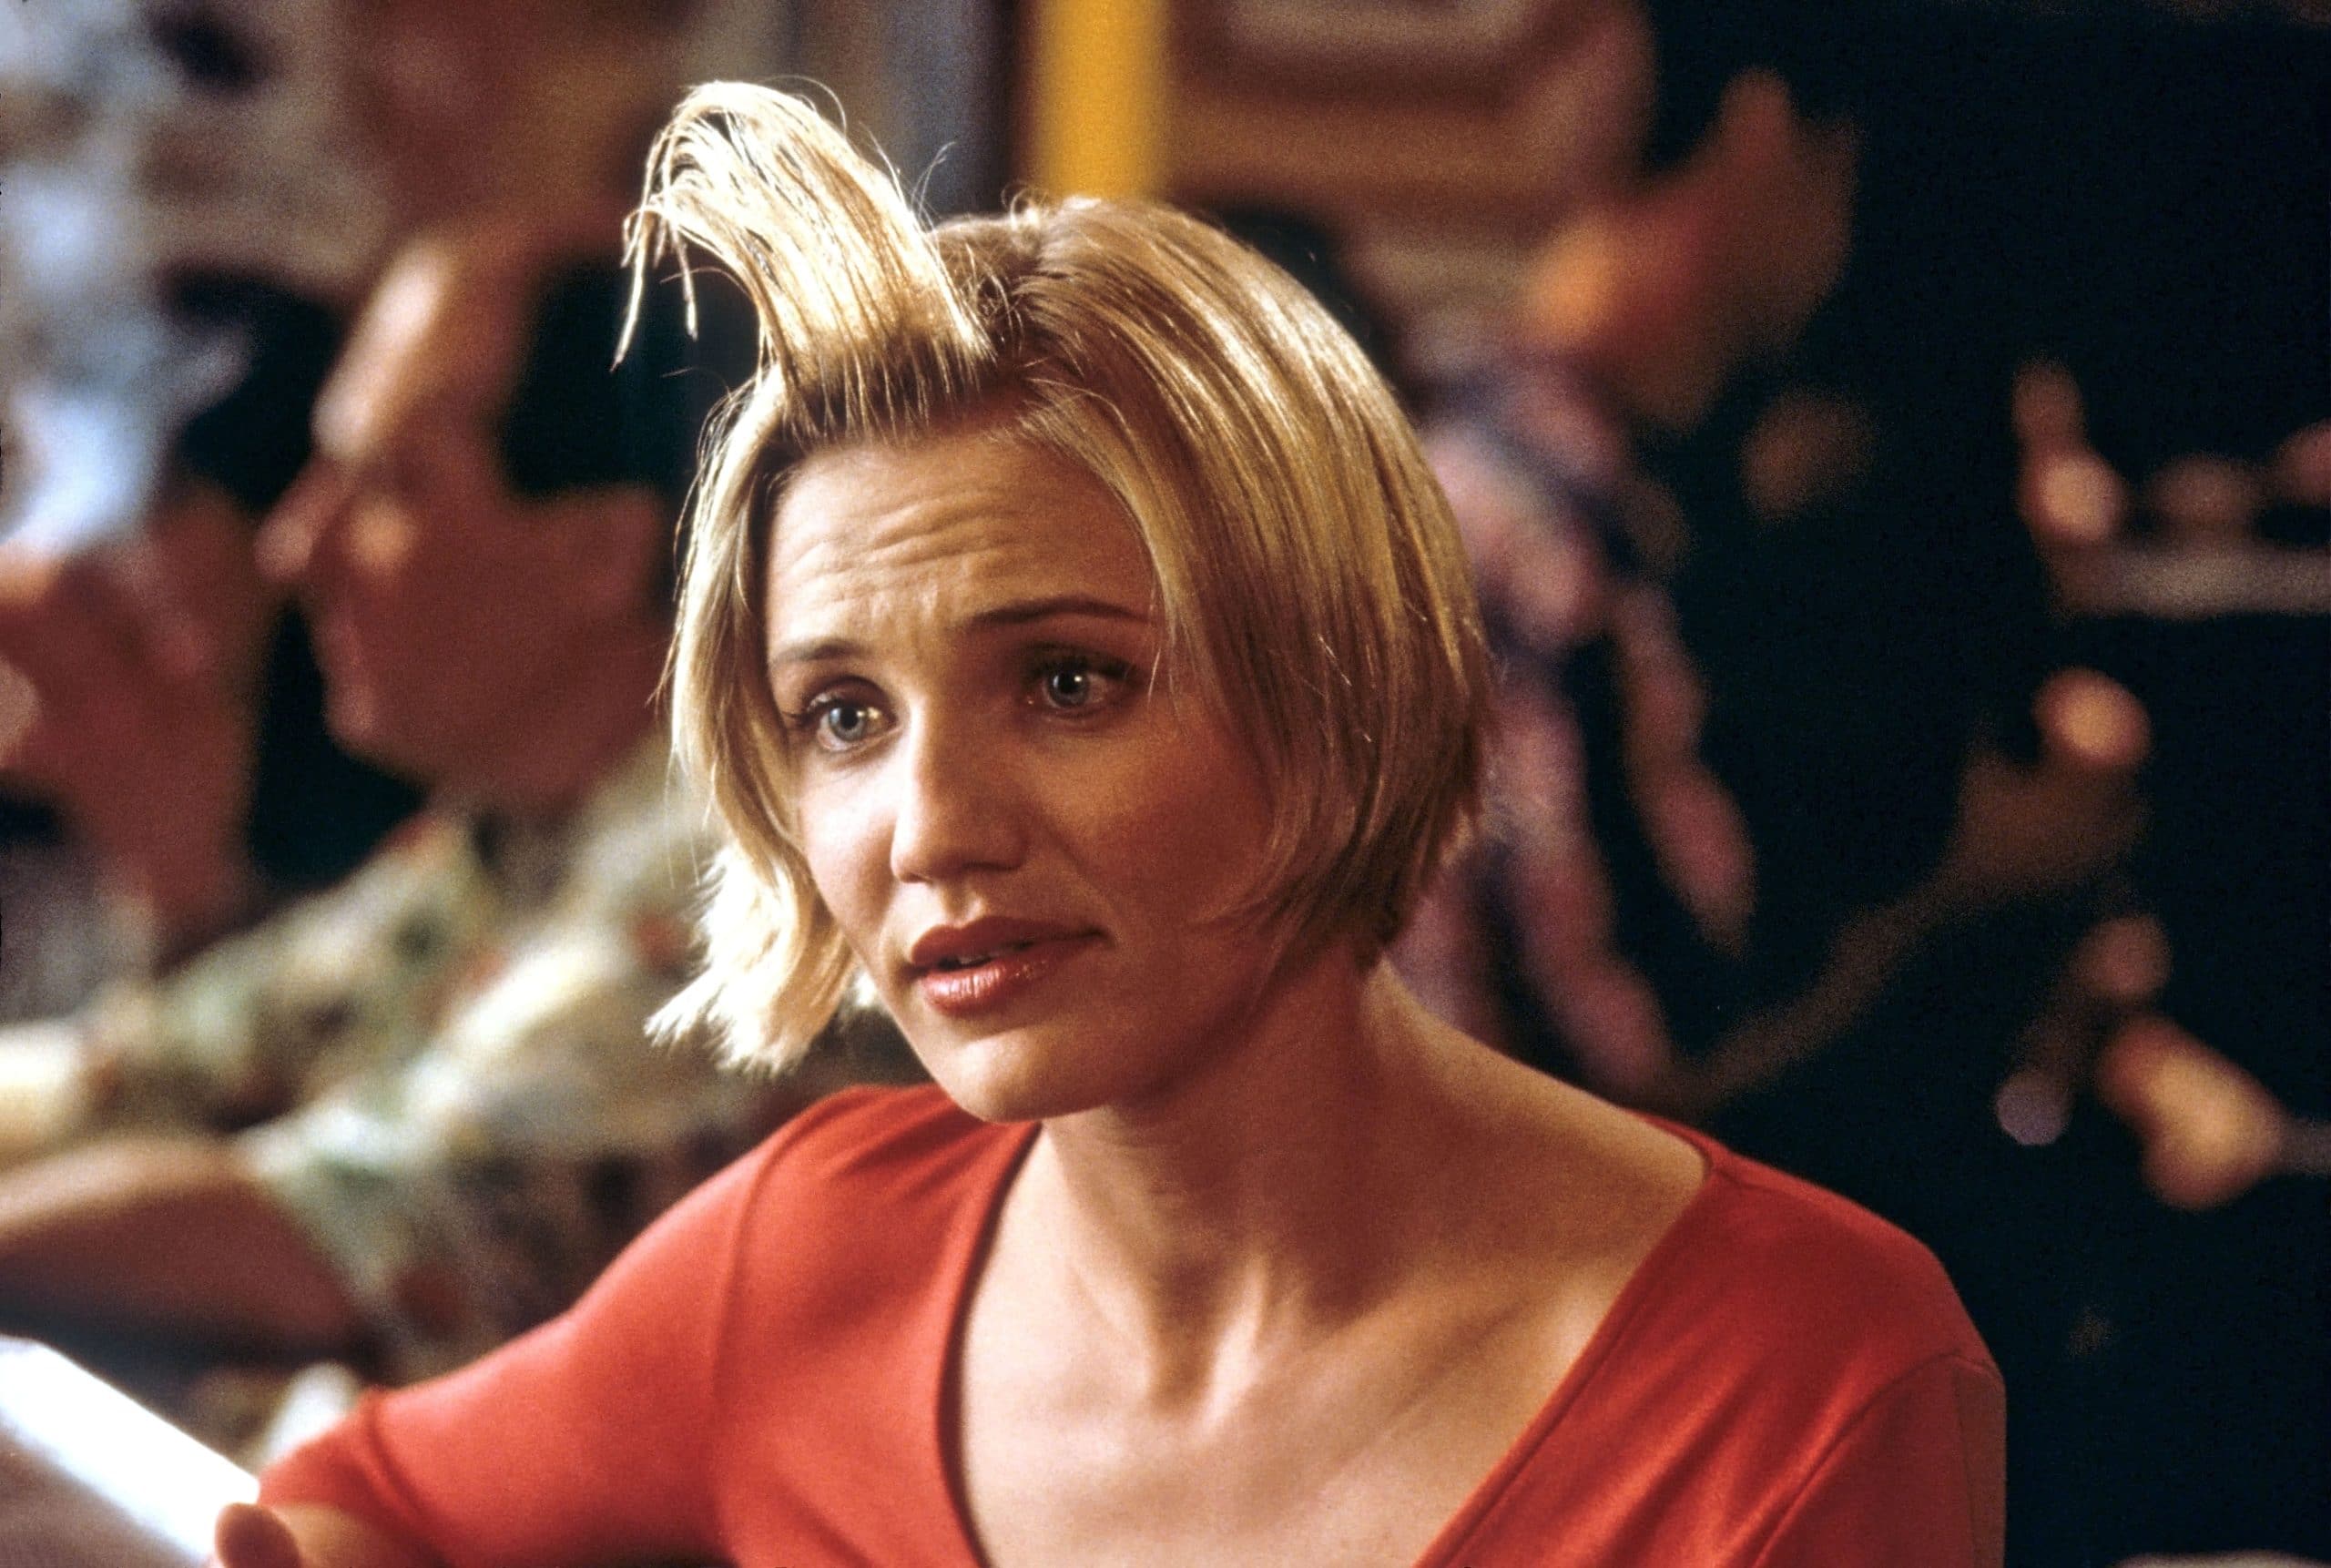 THERE'S SOMETHING ABOUT MARY, Cameron Diaz, 1998